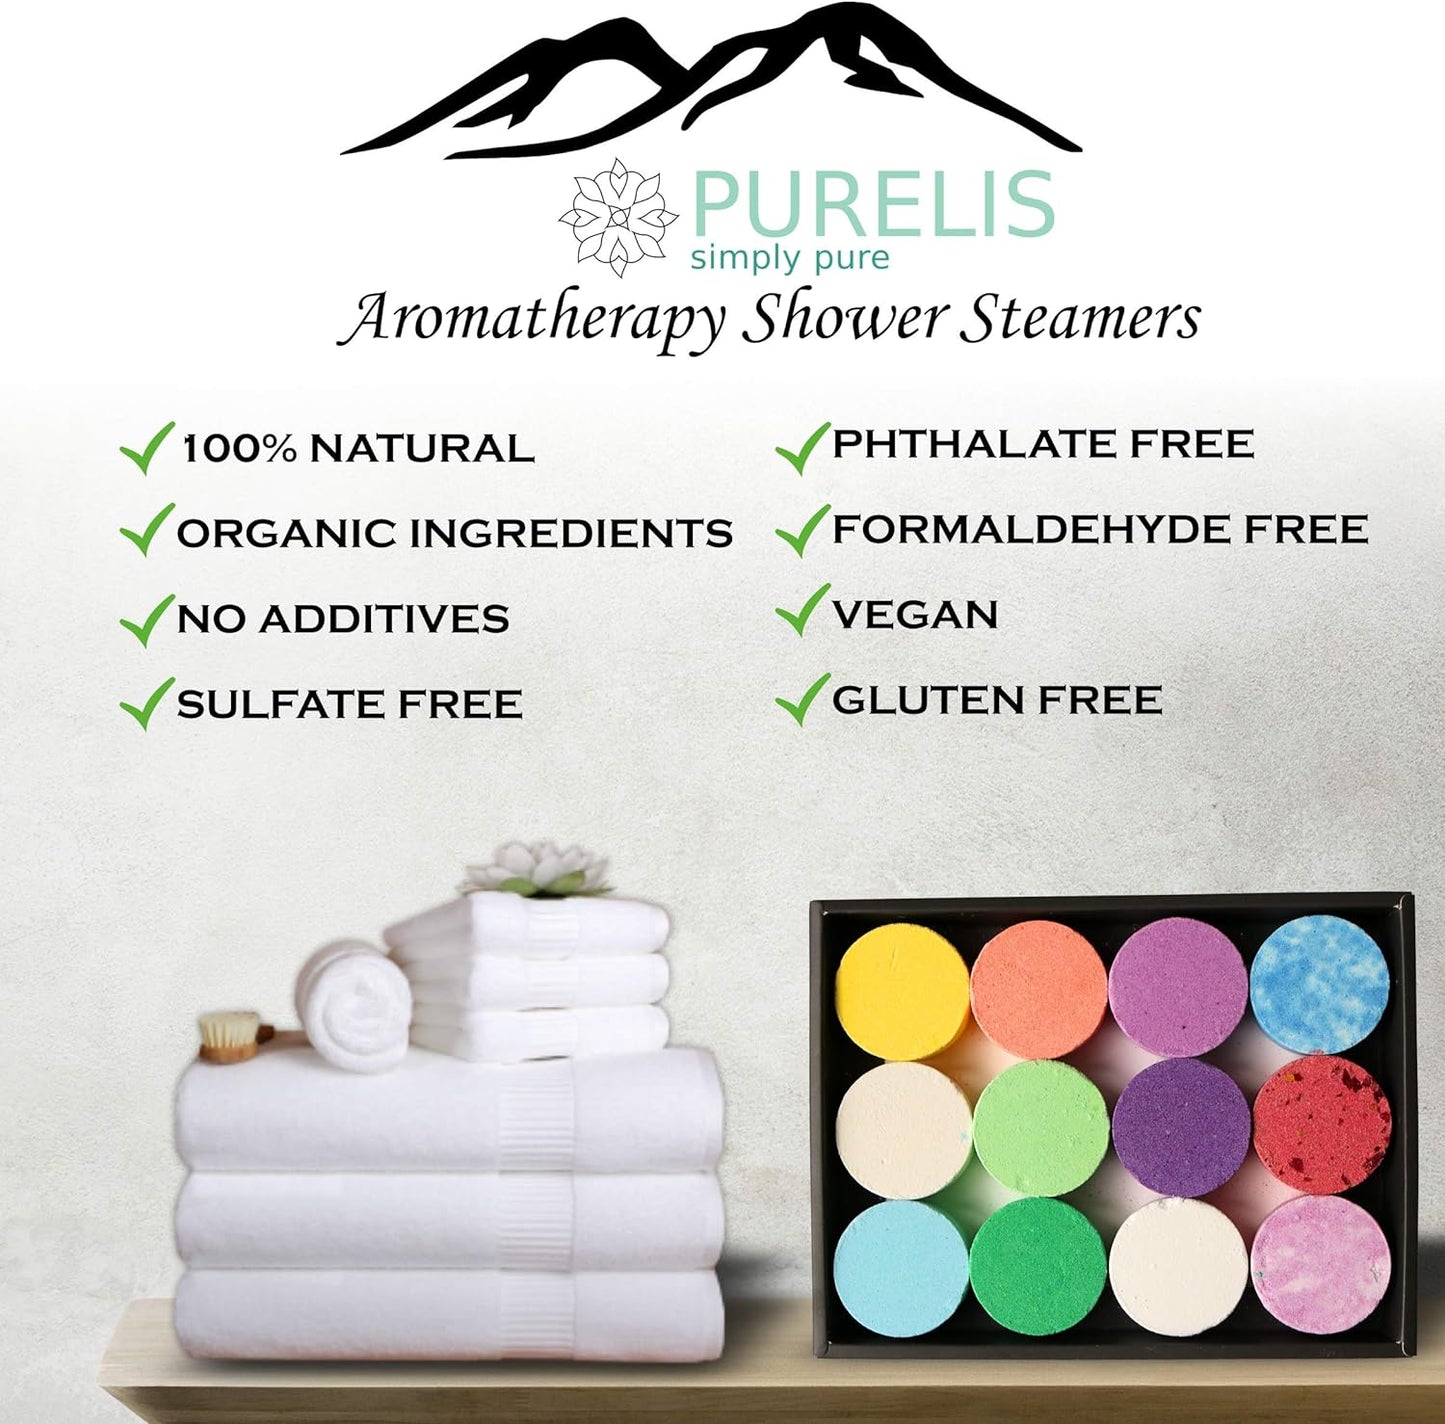 New Shower Steamer Gift Box. Set of 12 Aromatherapy Shower and Bath Bombs Individually Wrapped. Organic Shower Steamer Tablets and Essential Oil Shower Steamers for Spa Gift Set